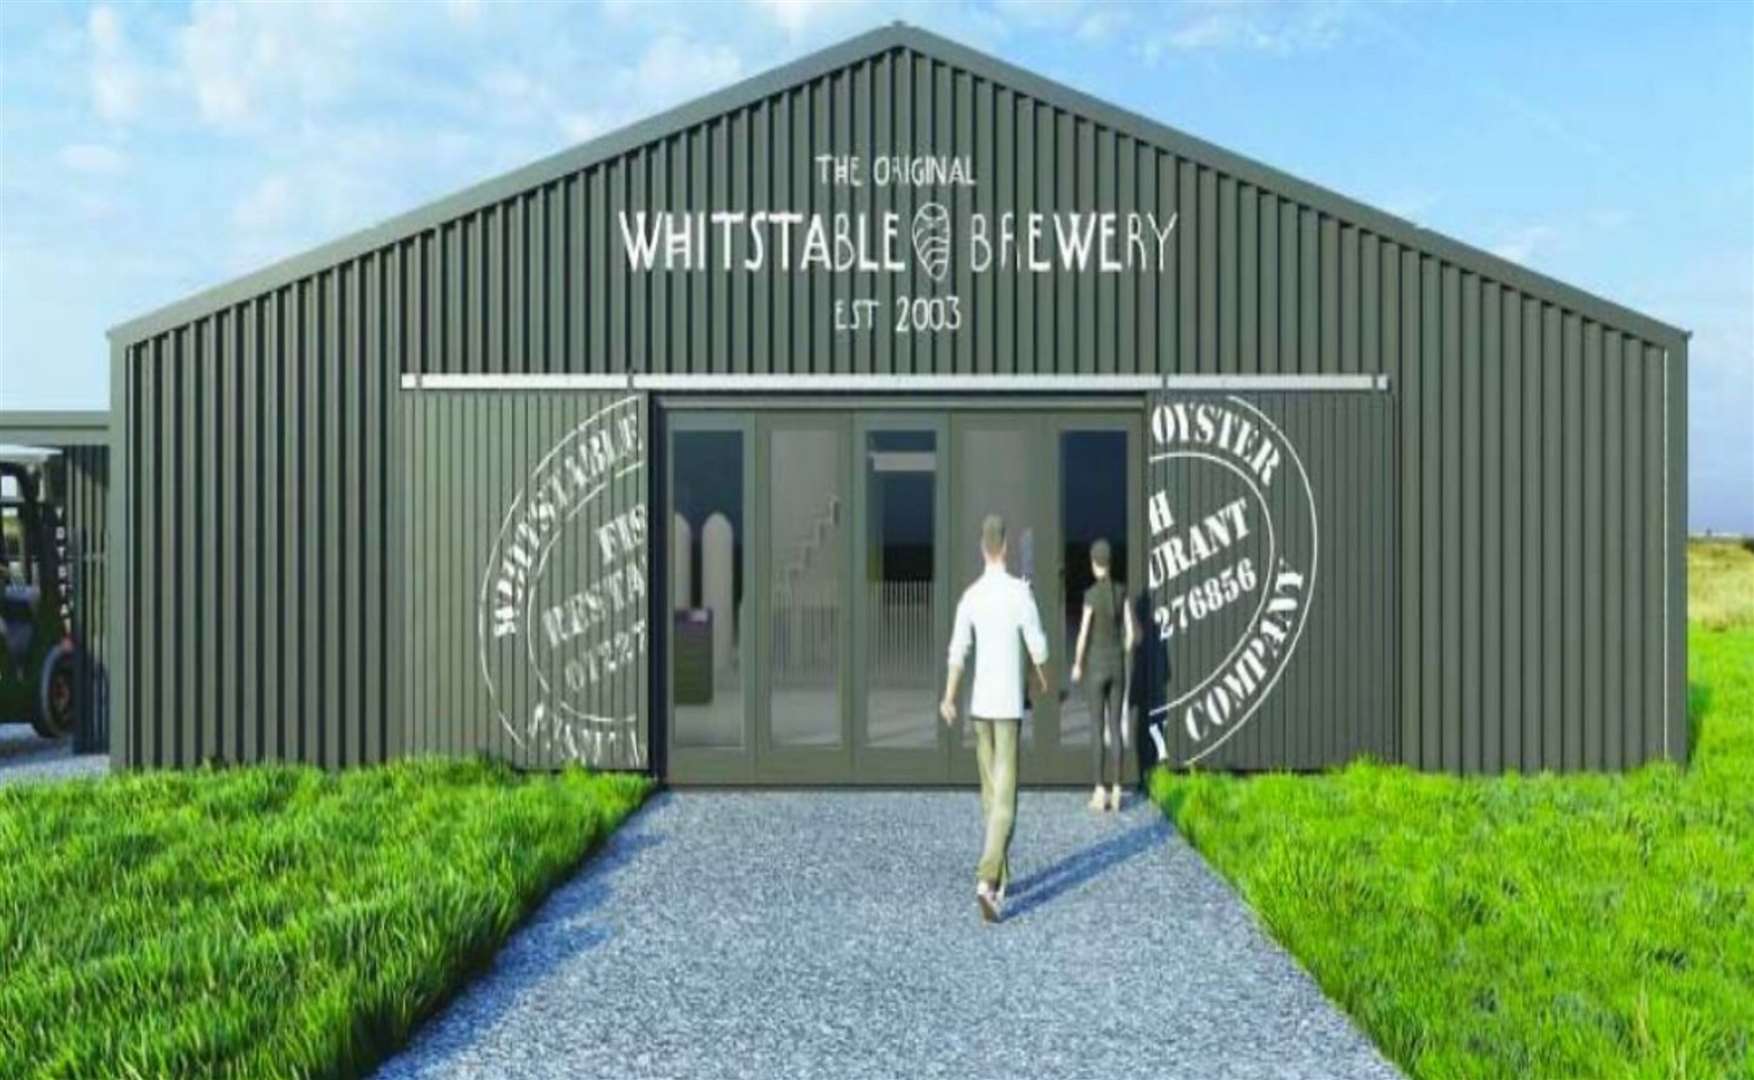 A CGI showing how the brewery was expected to look last year